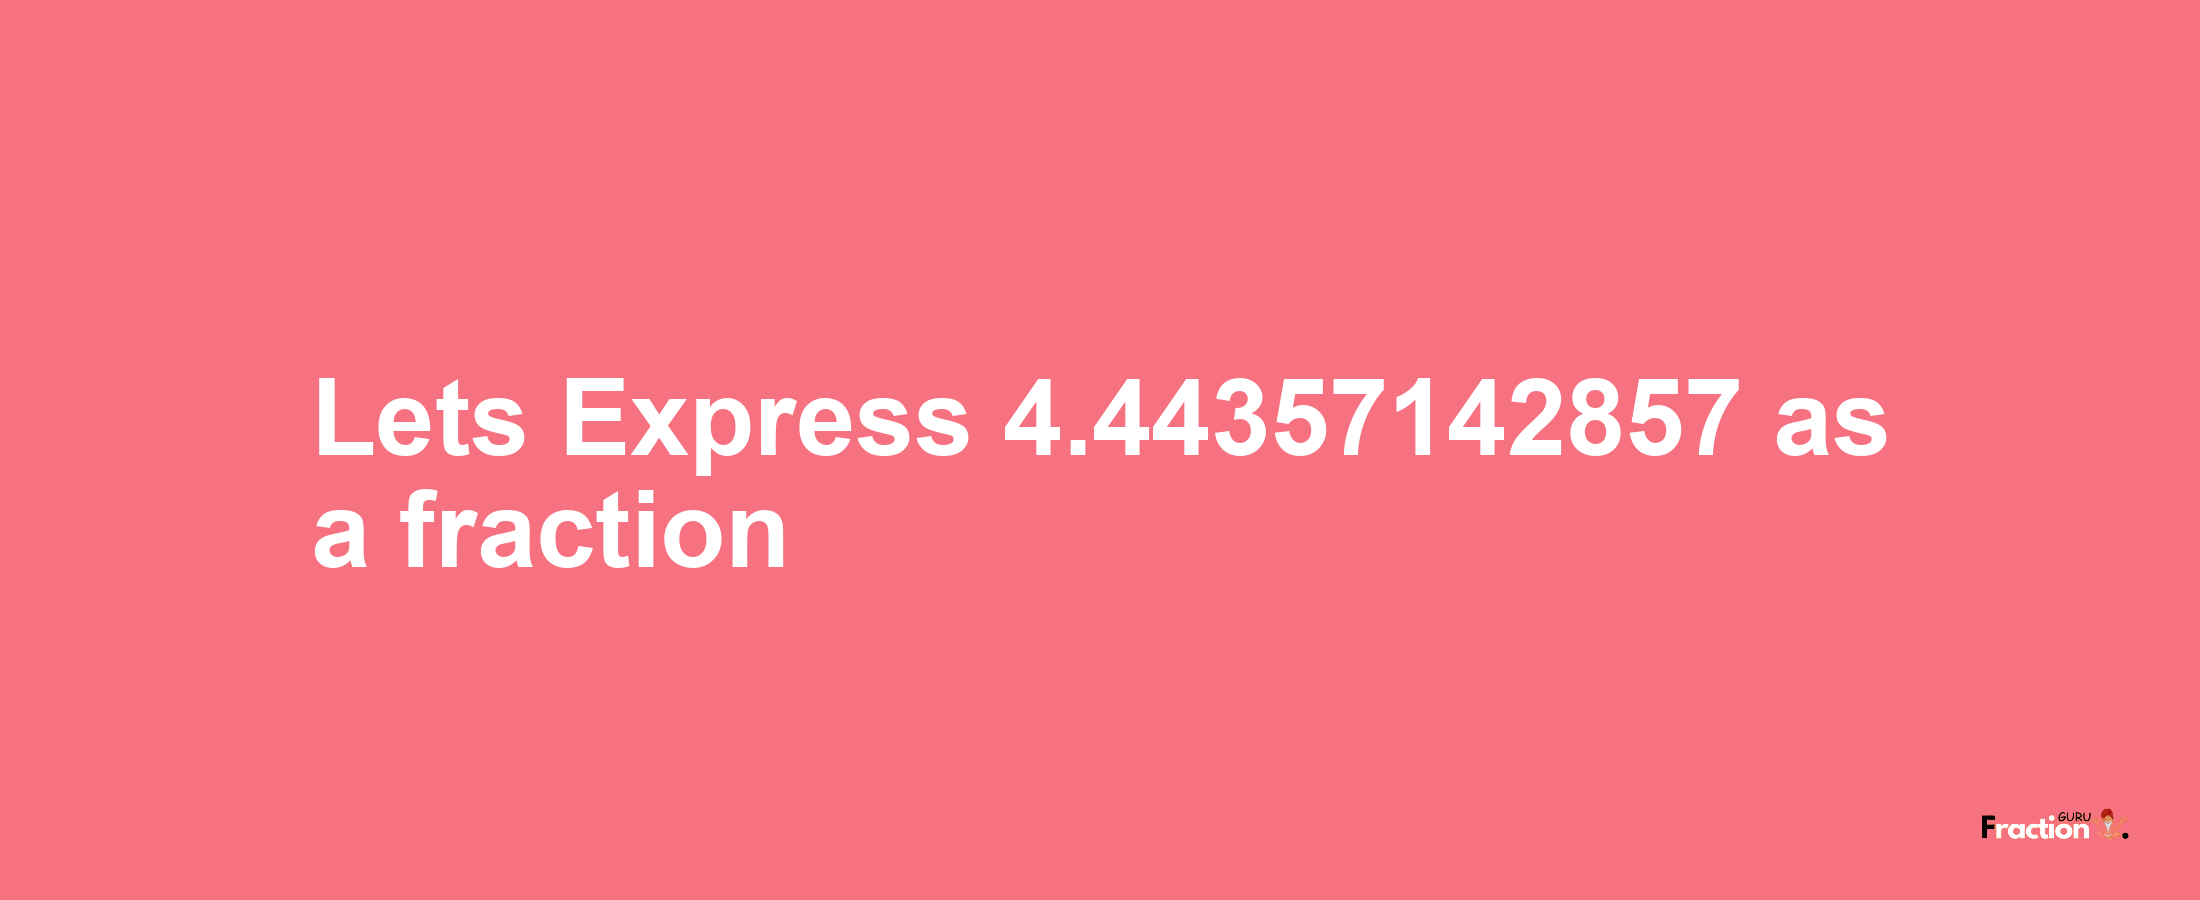 Lets Express 4.44357142857 as afraction